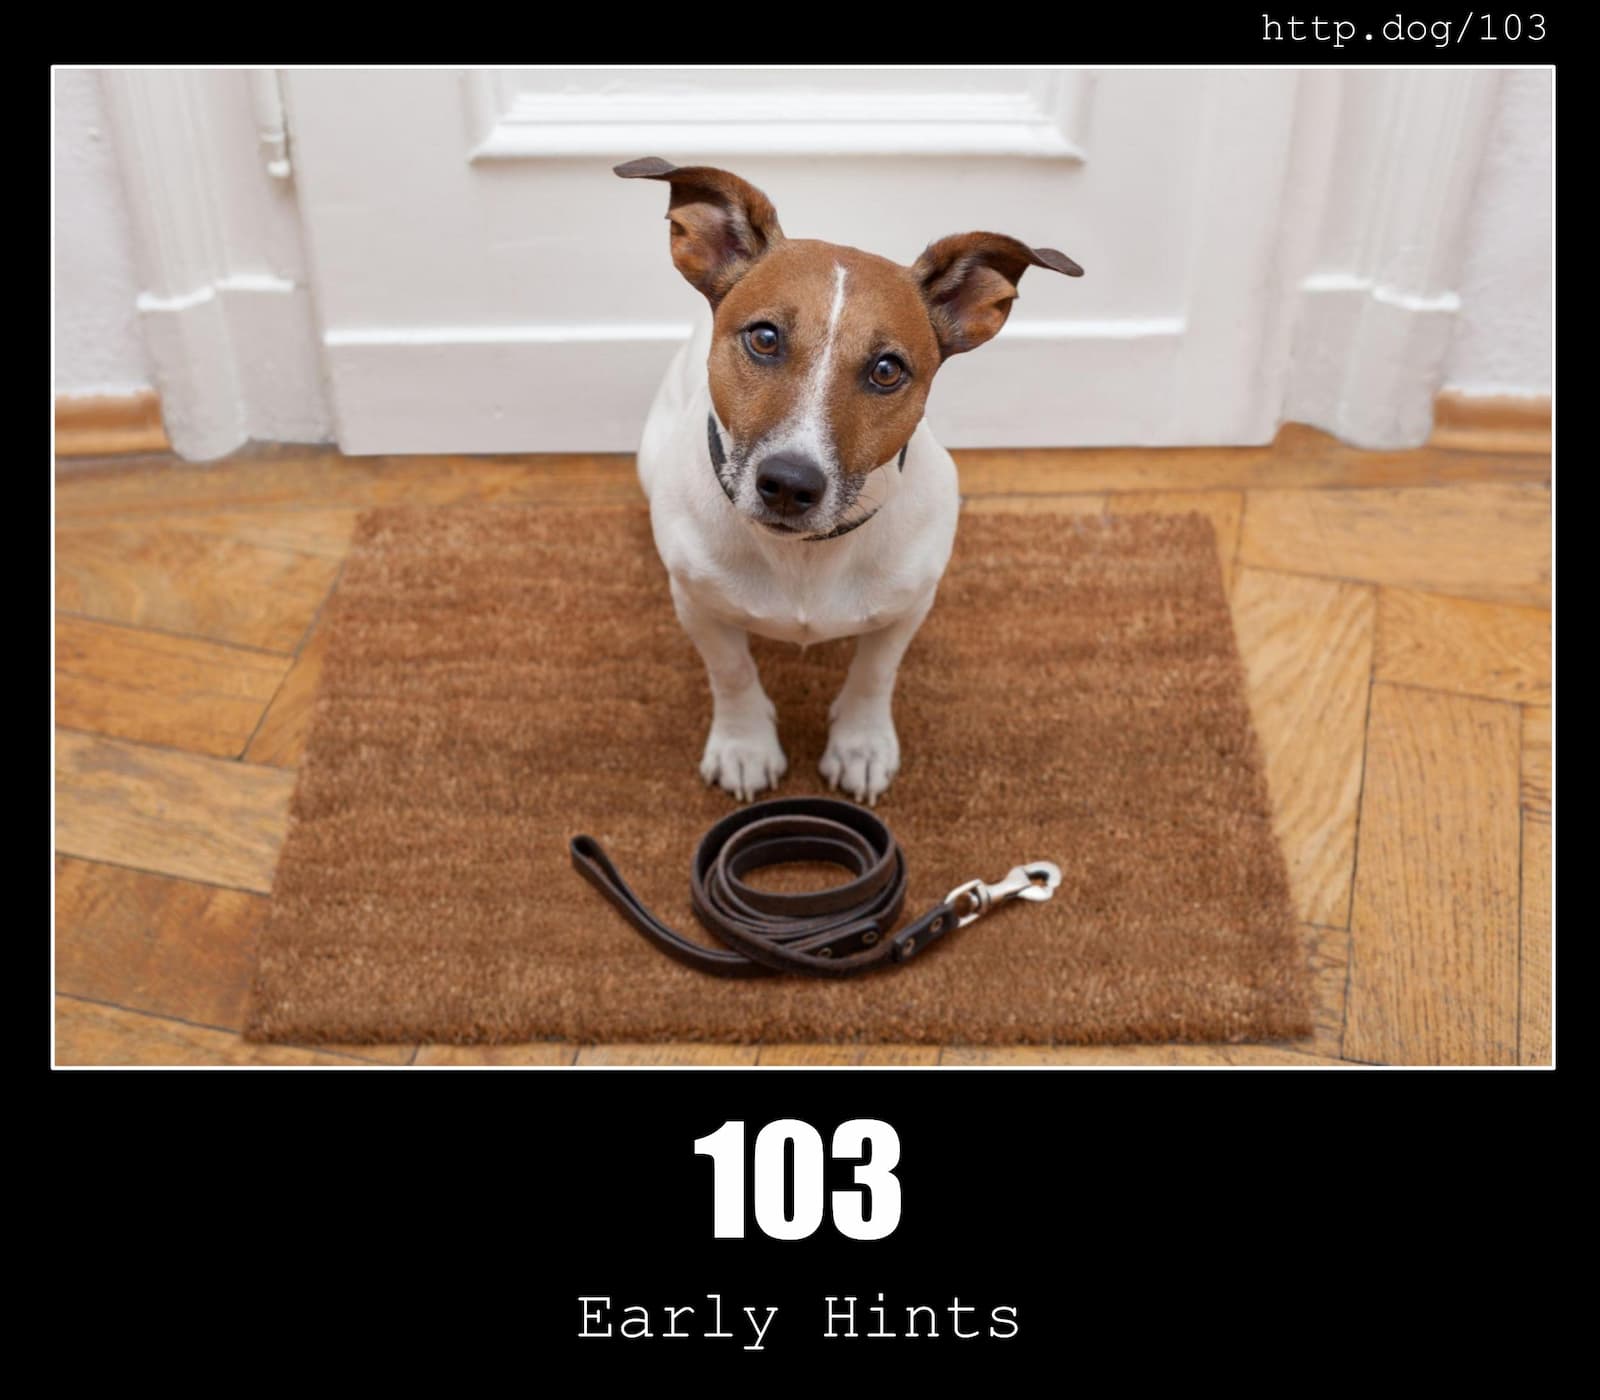 HTTP Status Code 103 Early Hints & Dogs